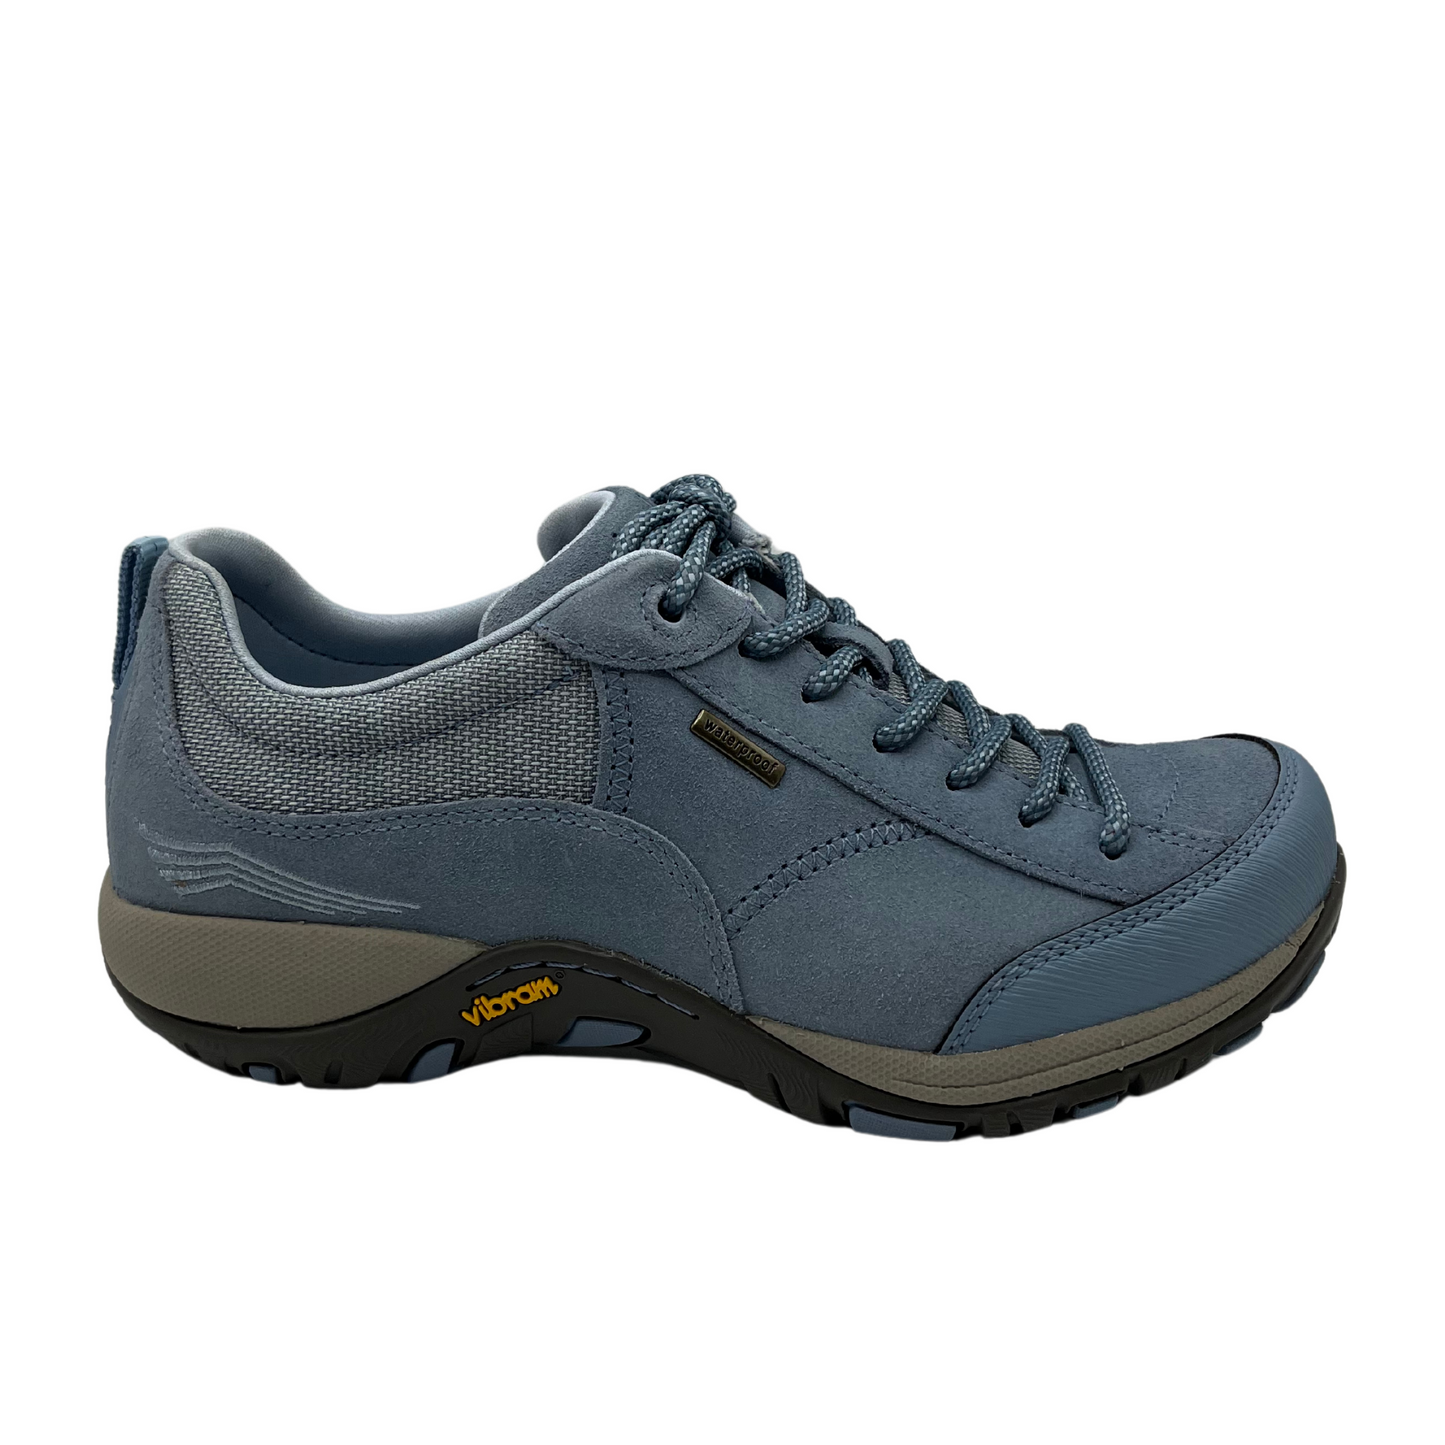 Right facing view of sky blue hiking shoe with vibram rubber outsole